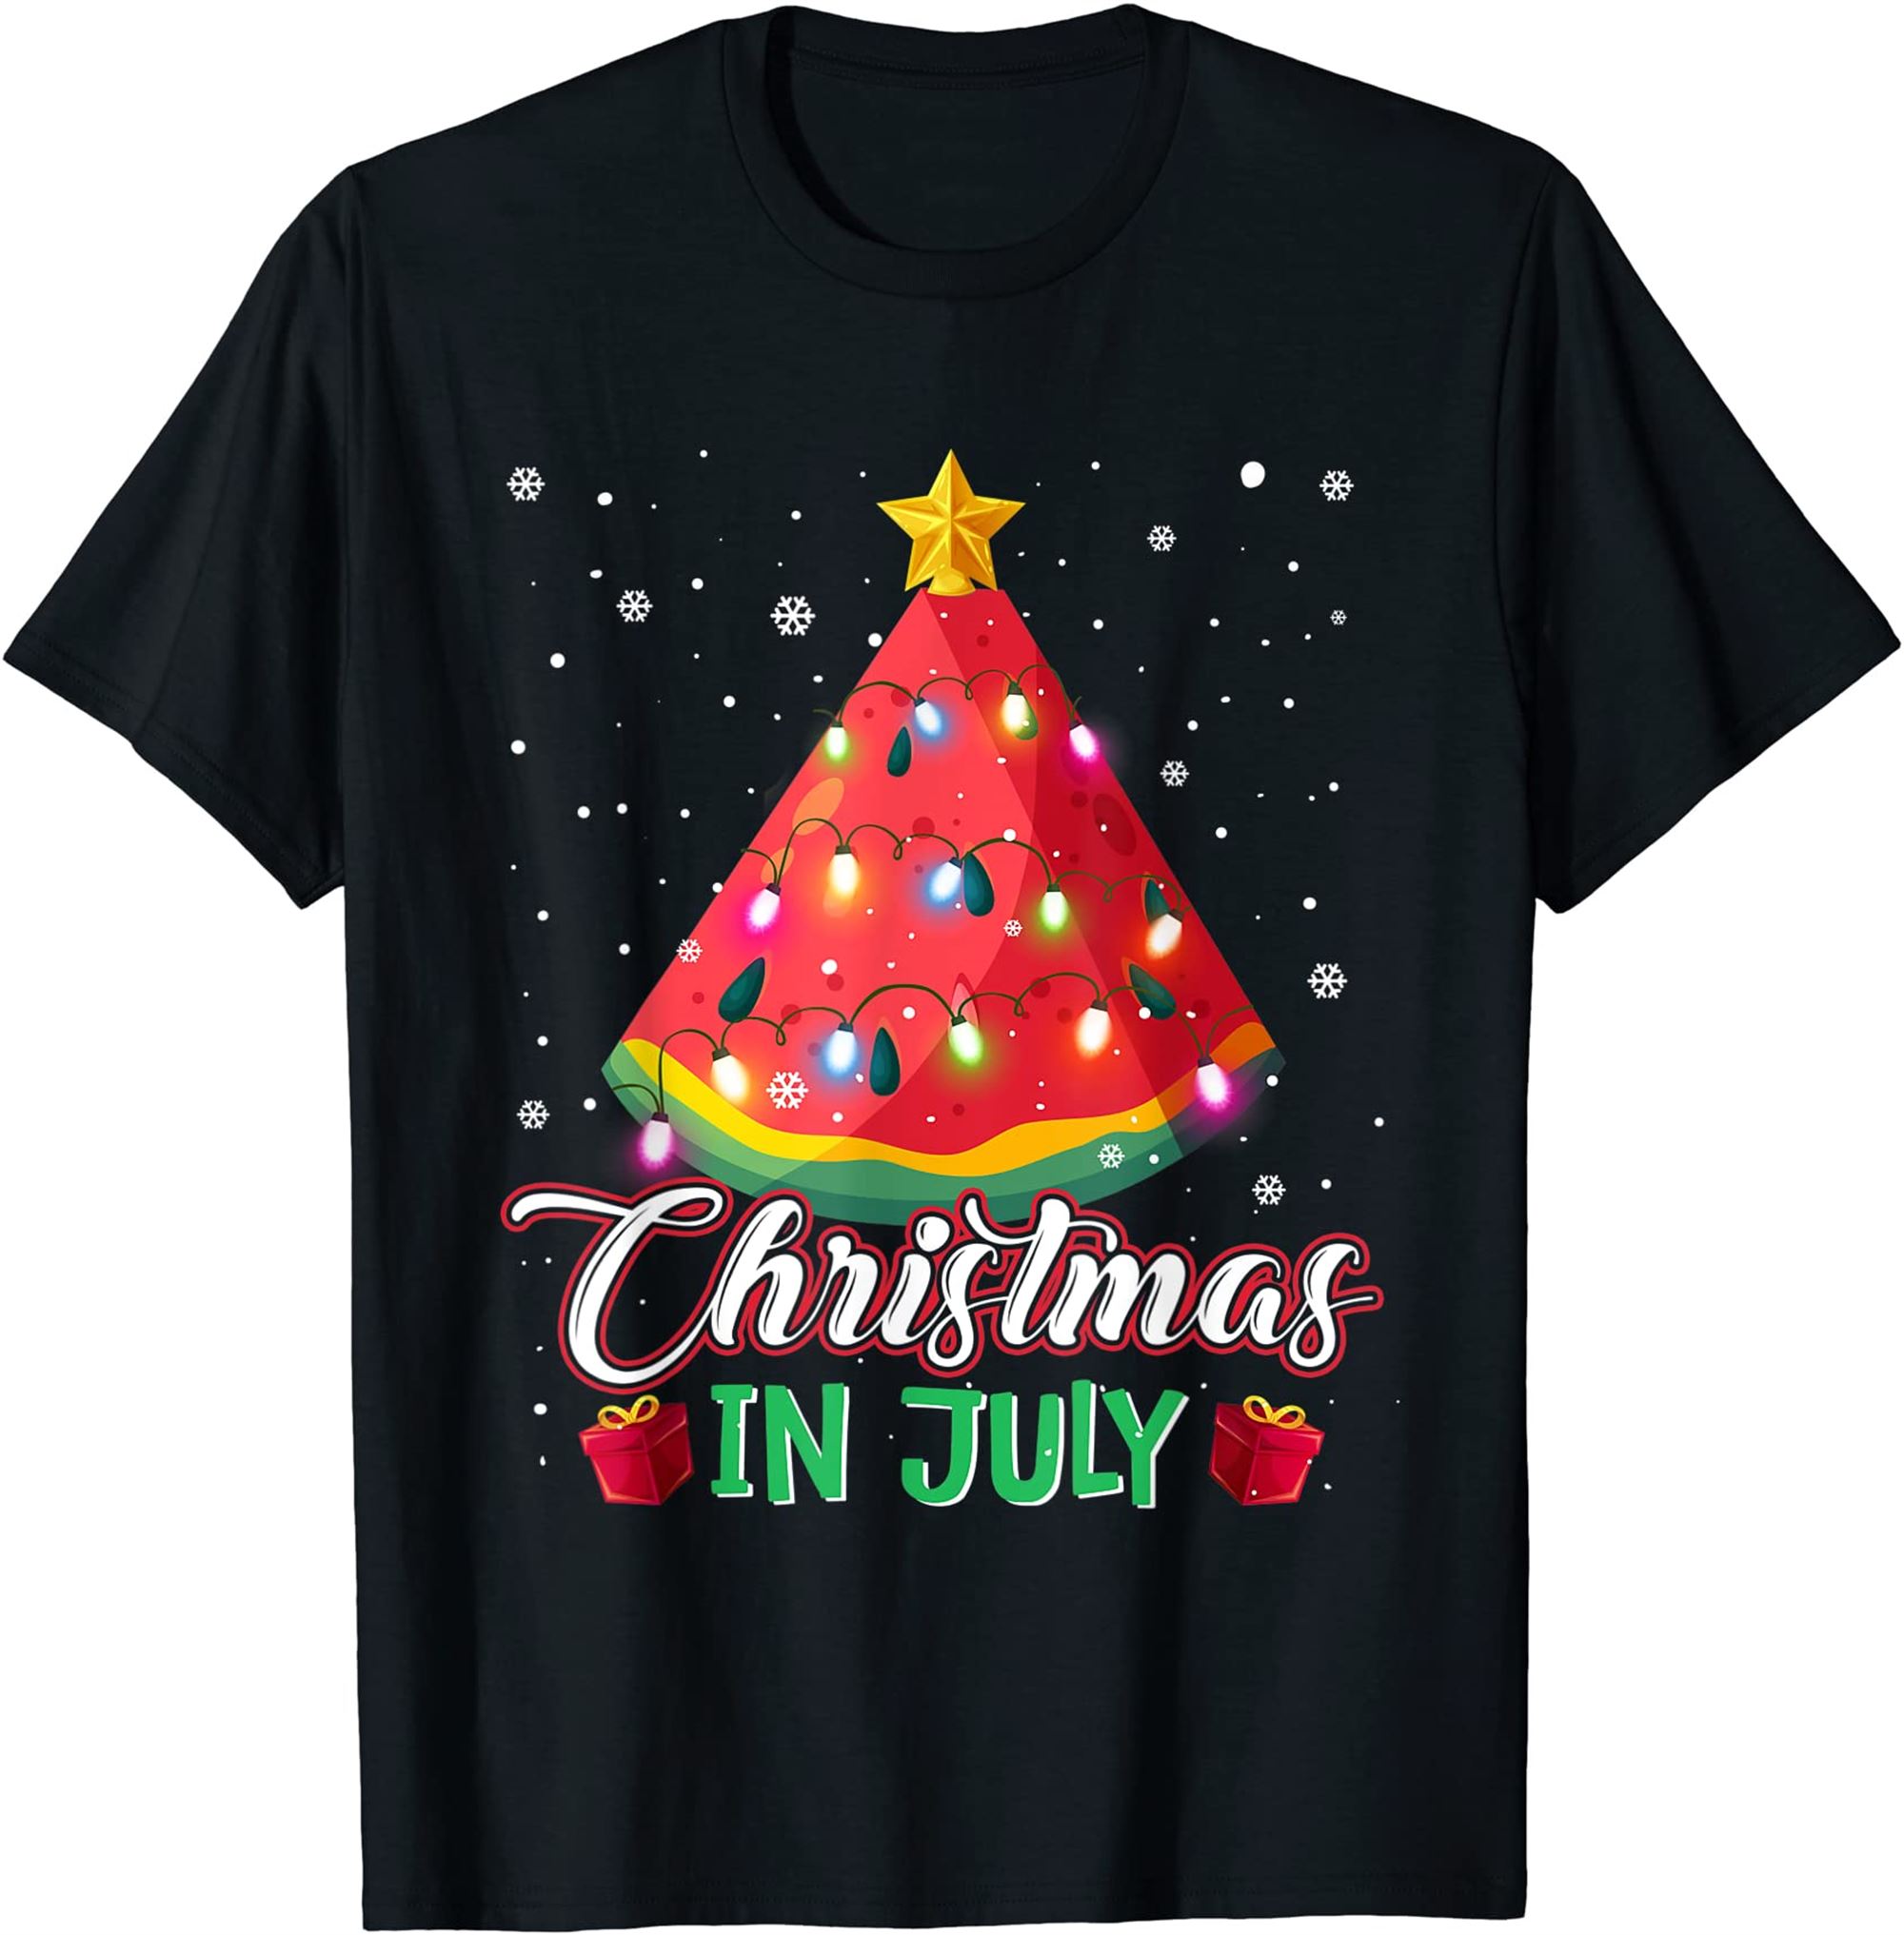 Watermelon Christmas Tree Christmas In July Summer Vacation T-shirt Full Size Up To 5xl